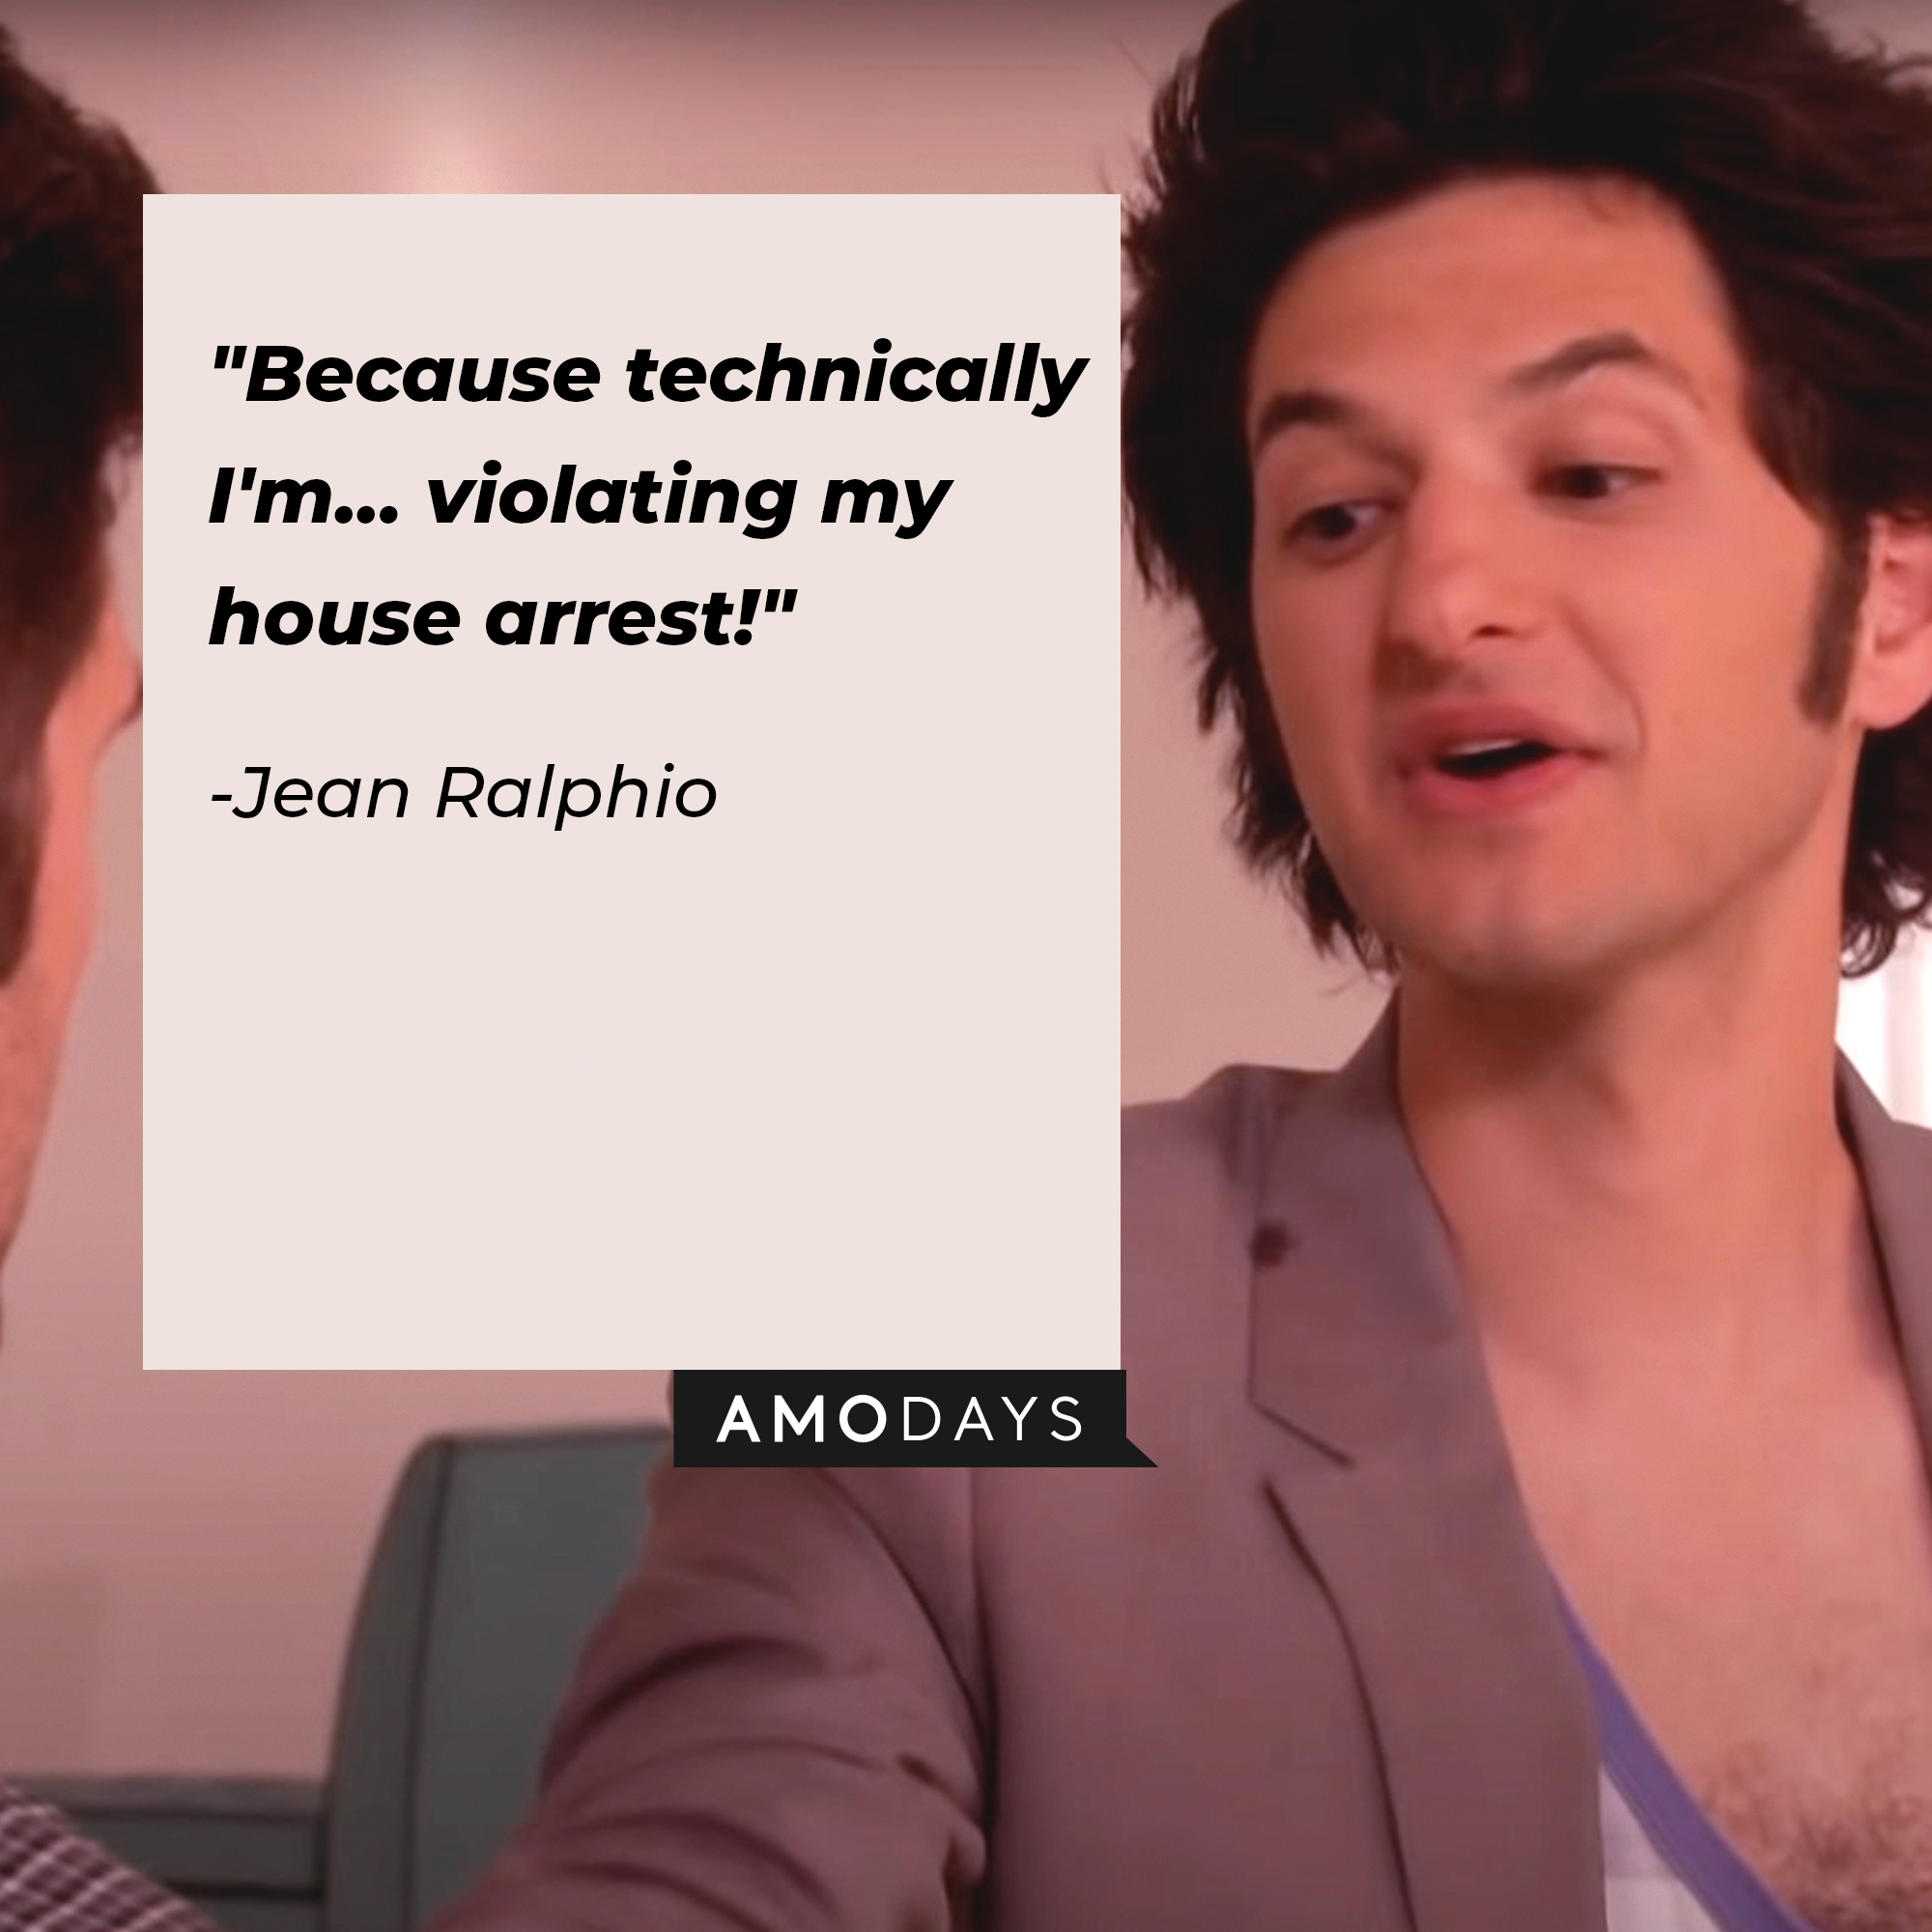 Jean Ralphio's quote: "Because technically I'm… violating my house arrest!" | Source: Facebook.com/parksandrecreation